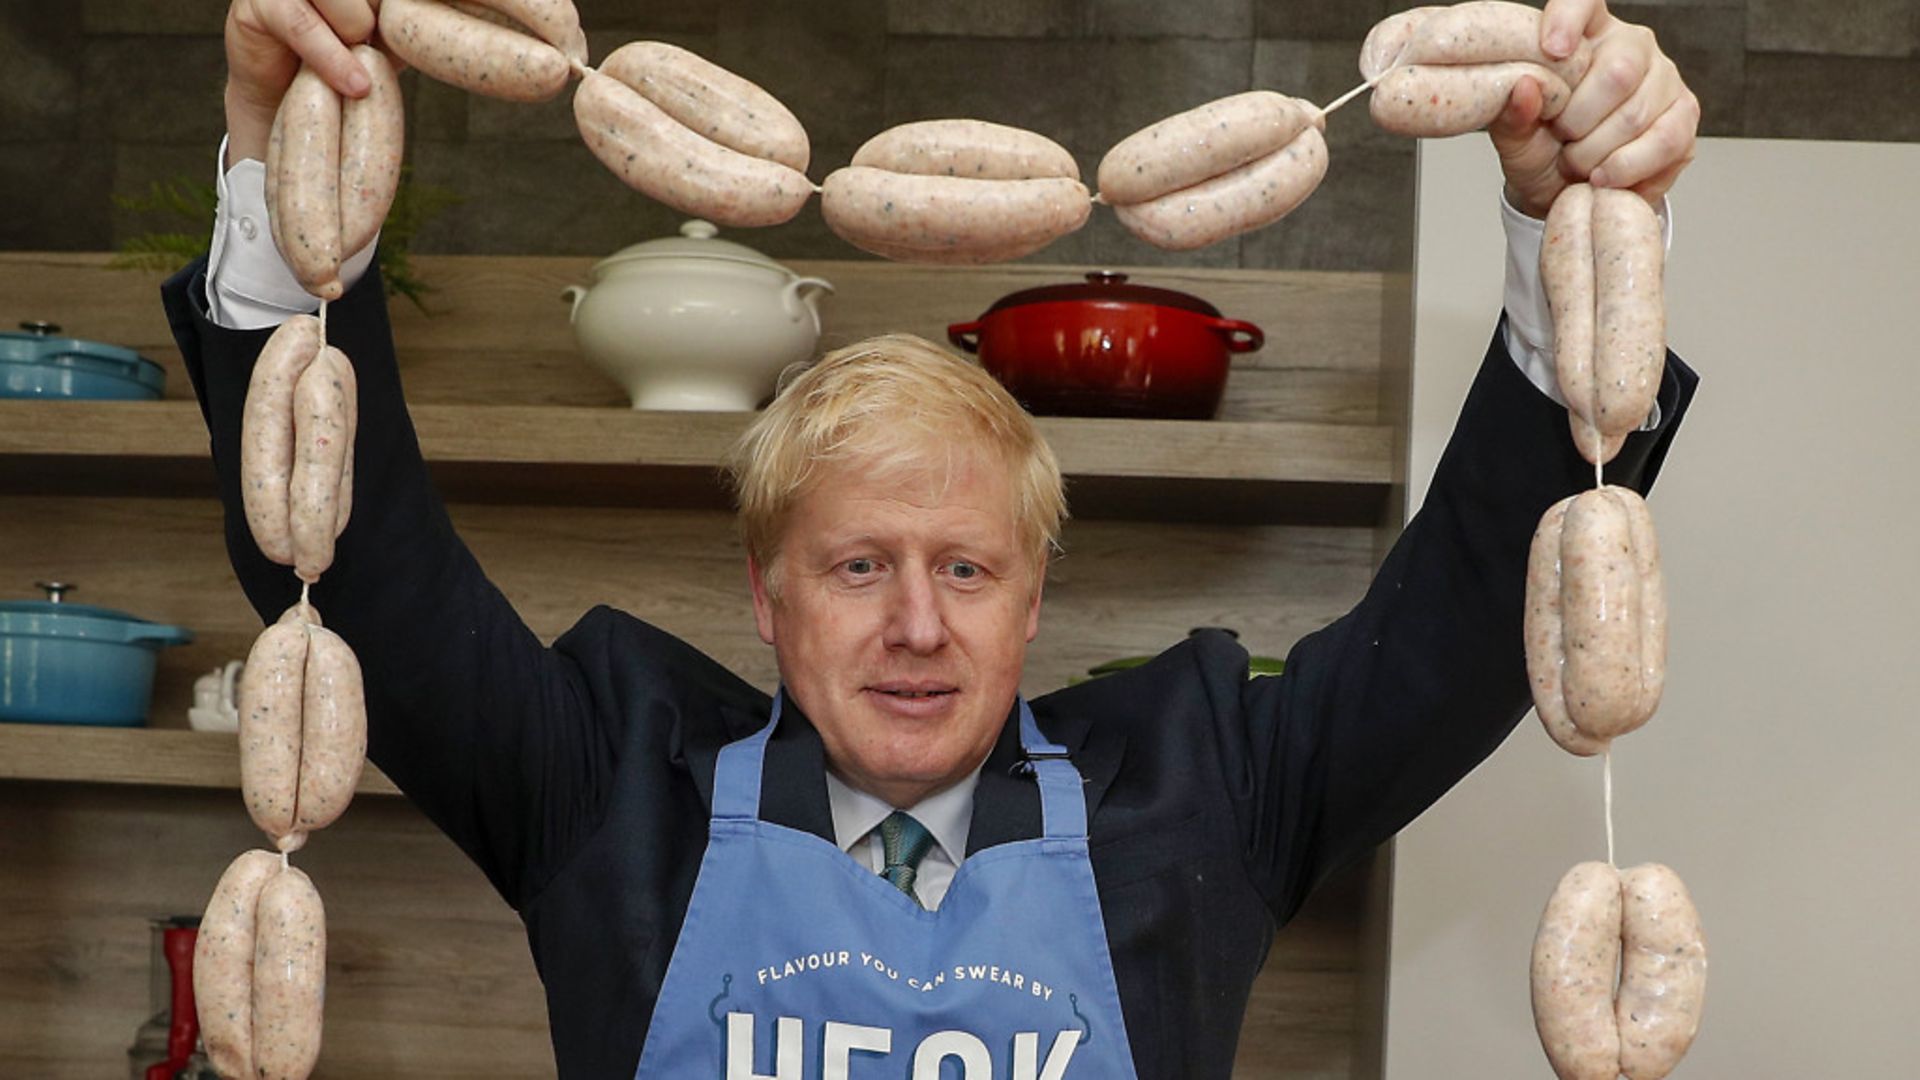 Boris Johnson holds up a string of sausages around his neck - Credit: PA